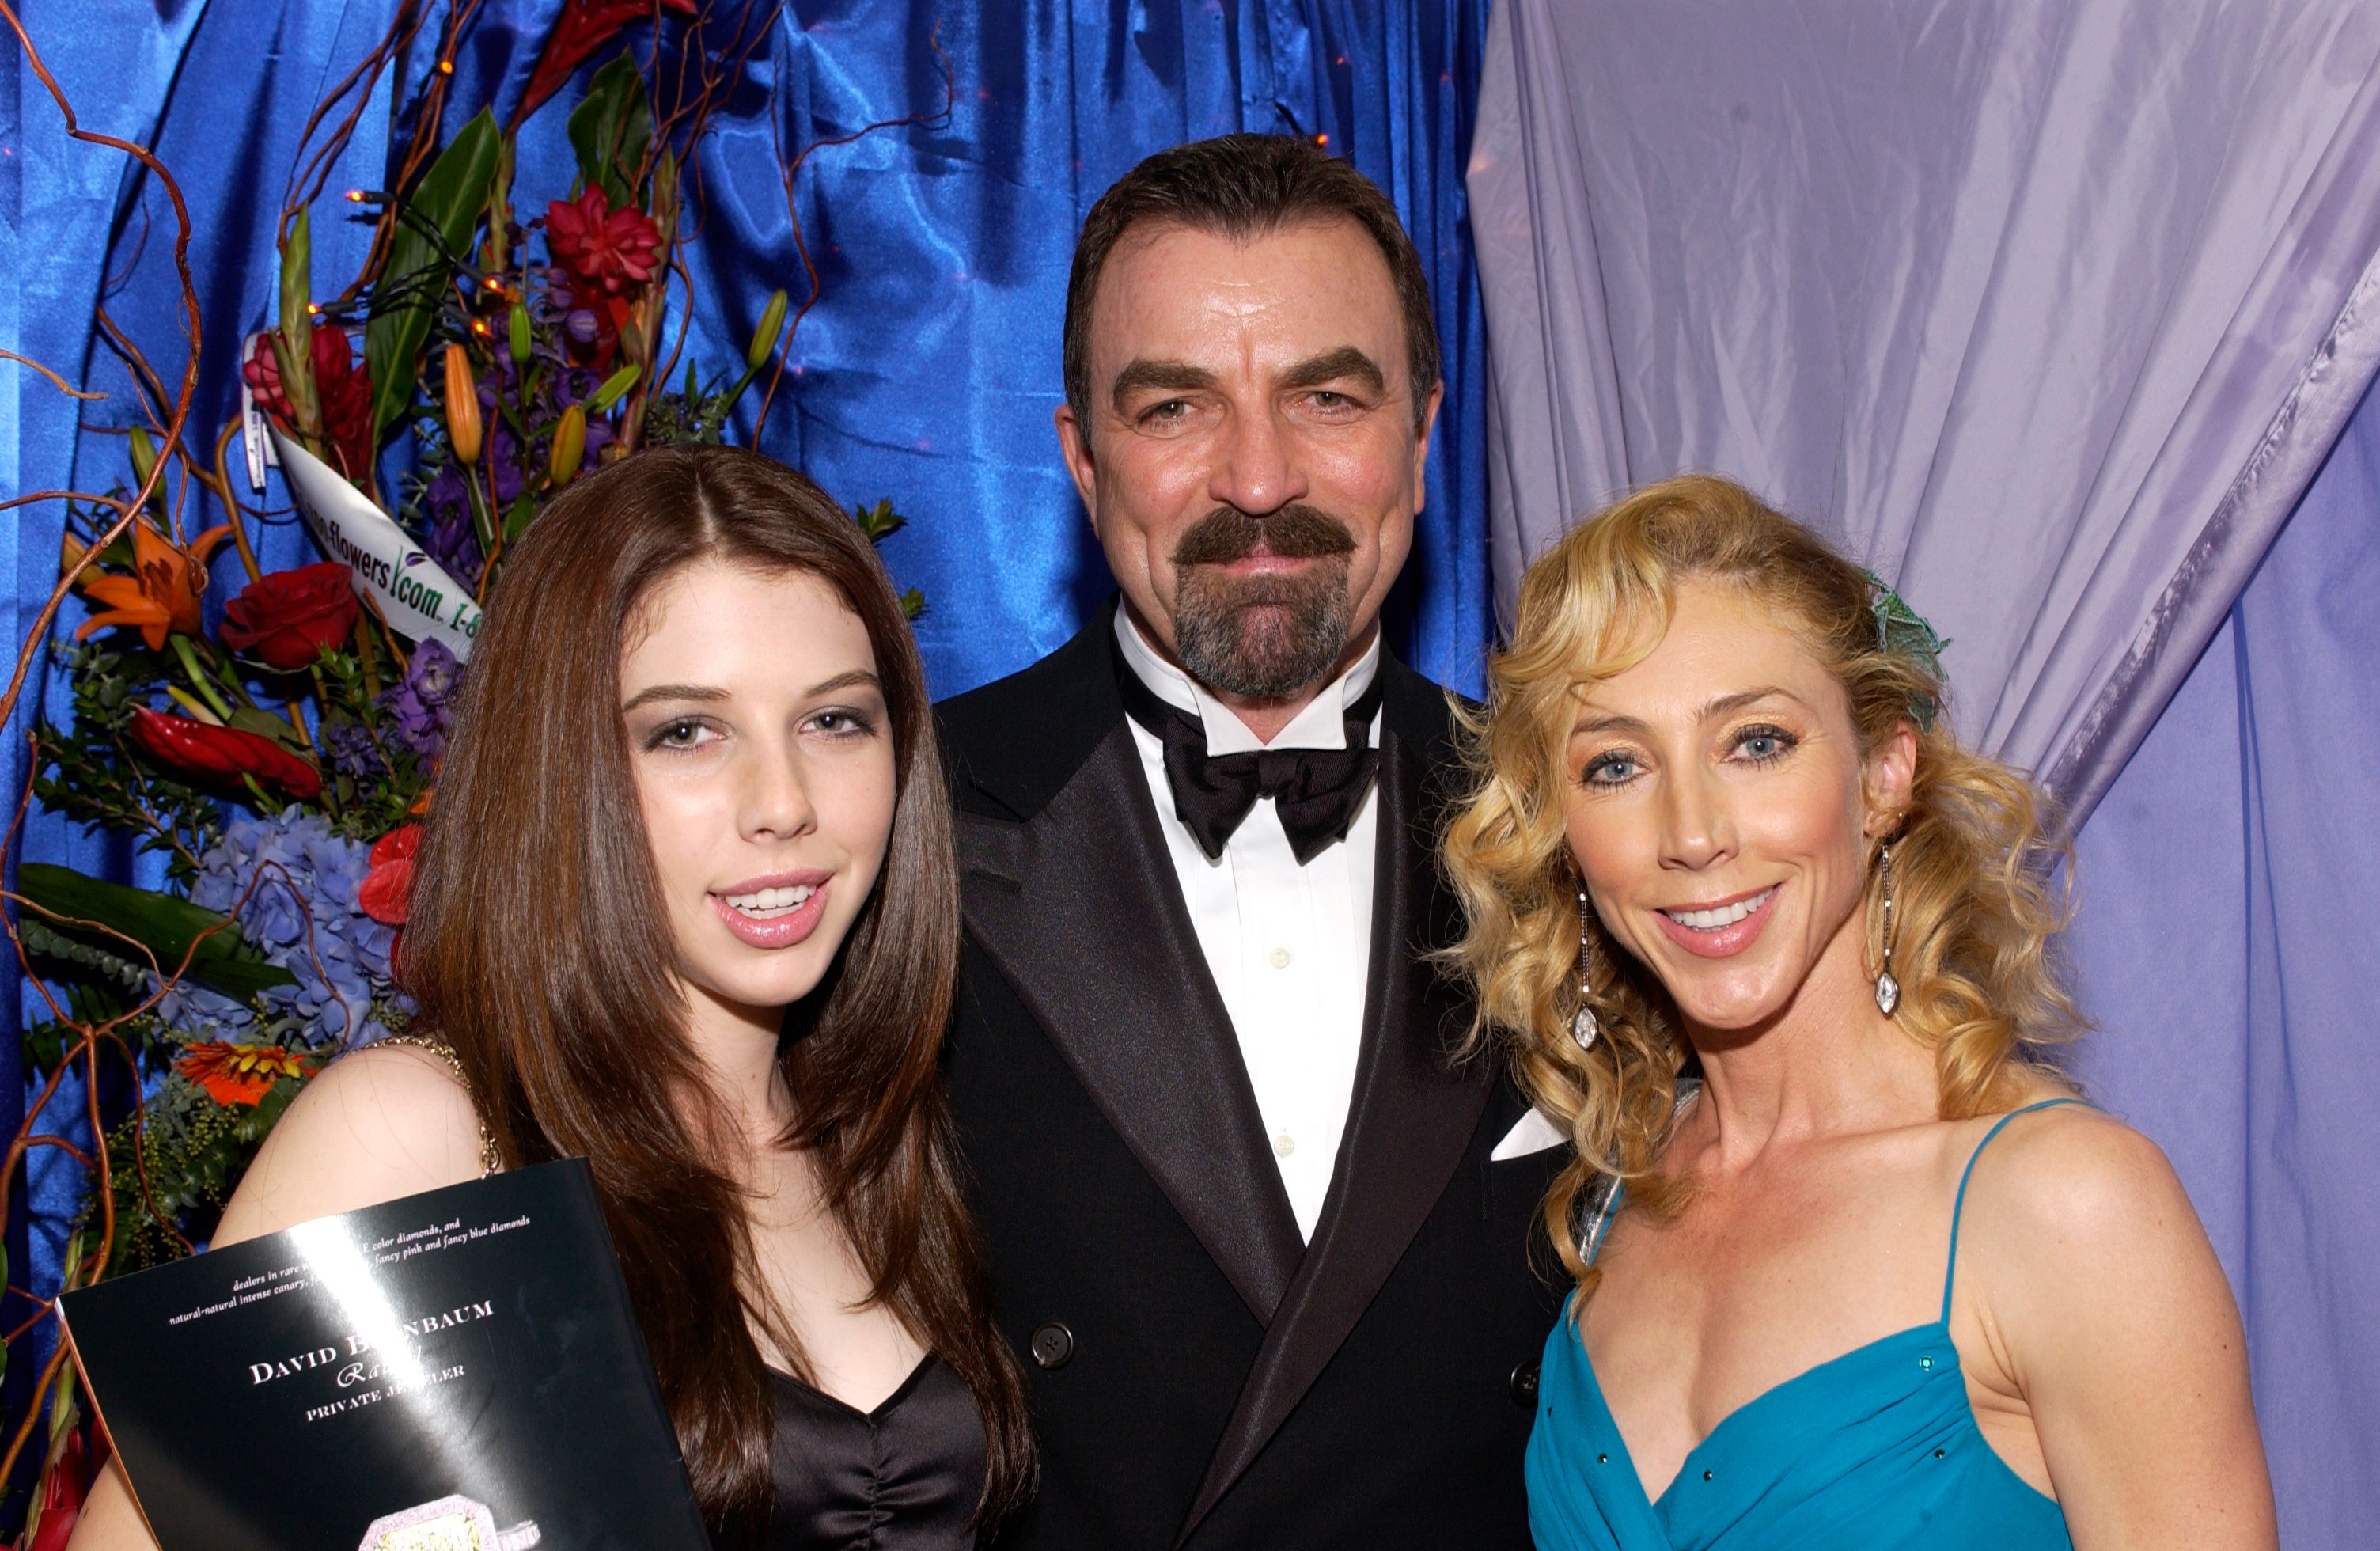 Tom Selleck, daugher Hannah and wife Jillie Mack at the Distinctive Assets Gift Lounge during the People?s Choice Awards on January 9, 2005. | Photo: Getty Images